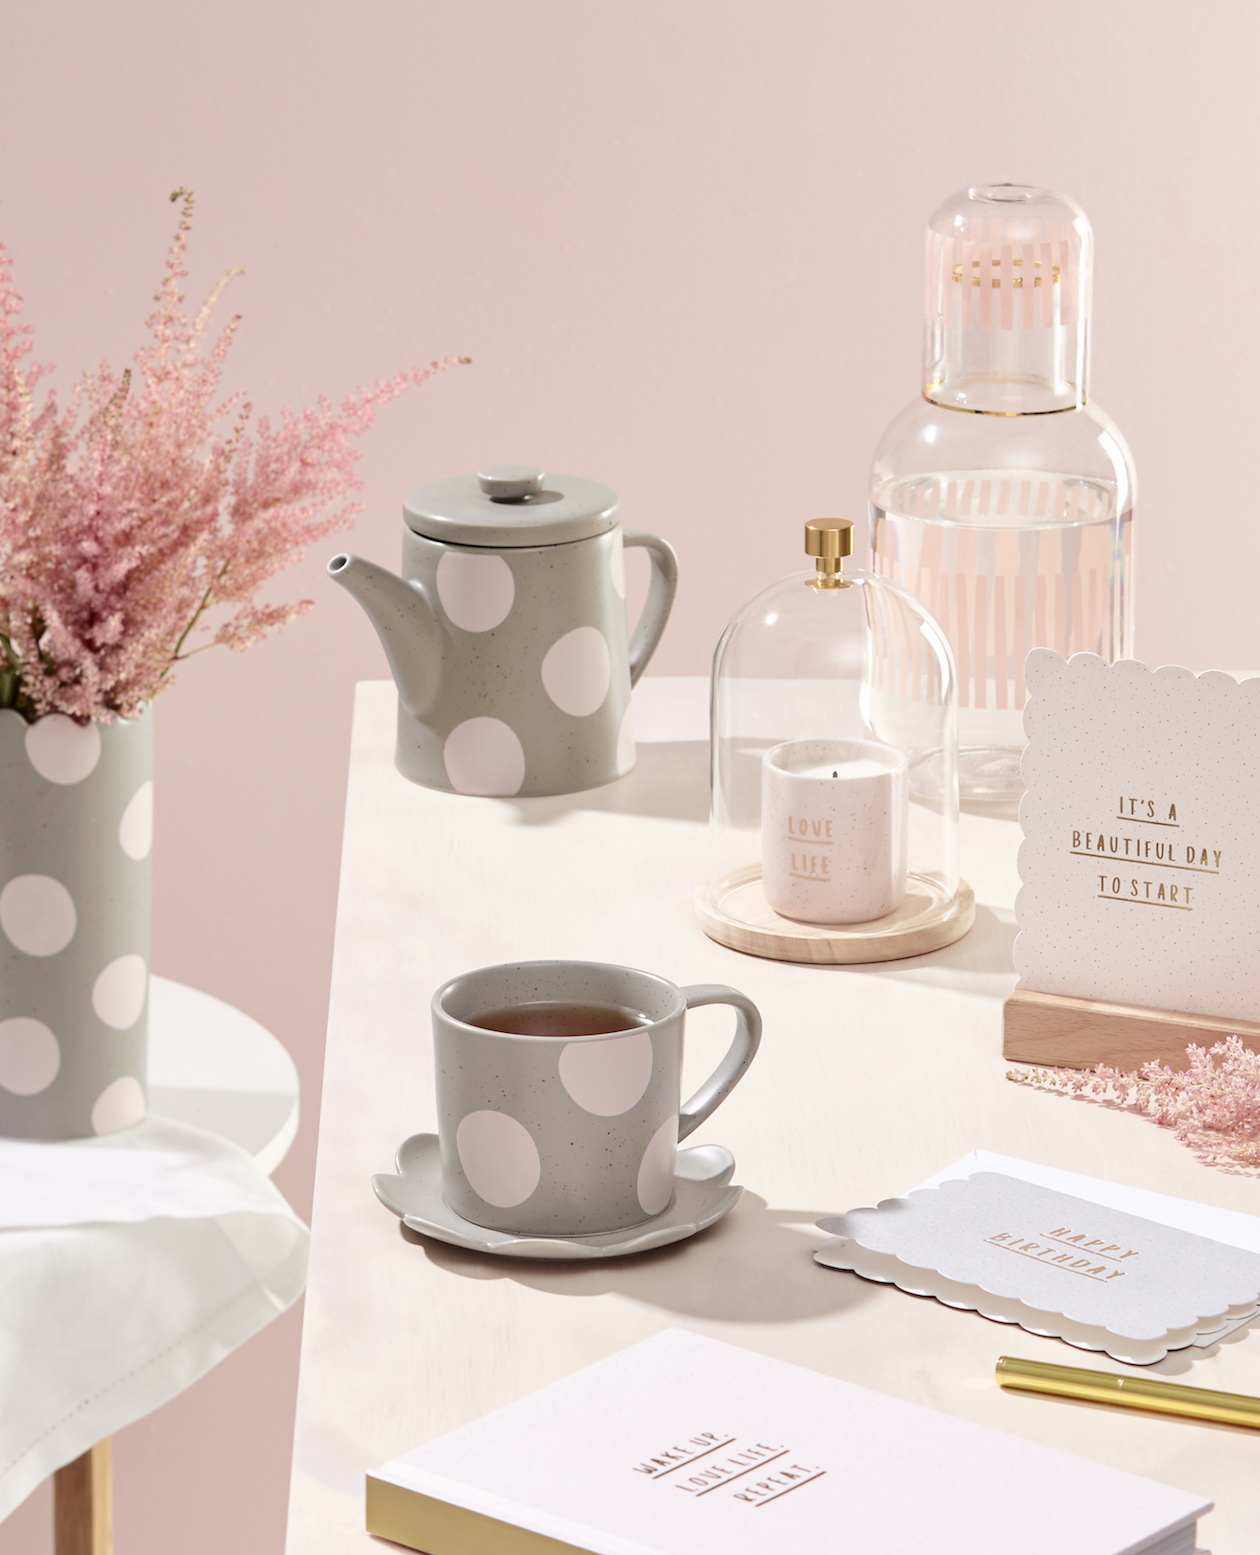 Kikki.K’s new range of homewares will help you wake up on the right side of the bed